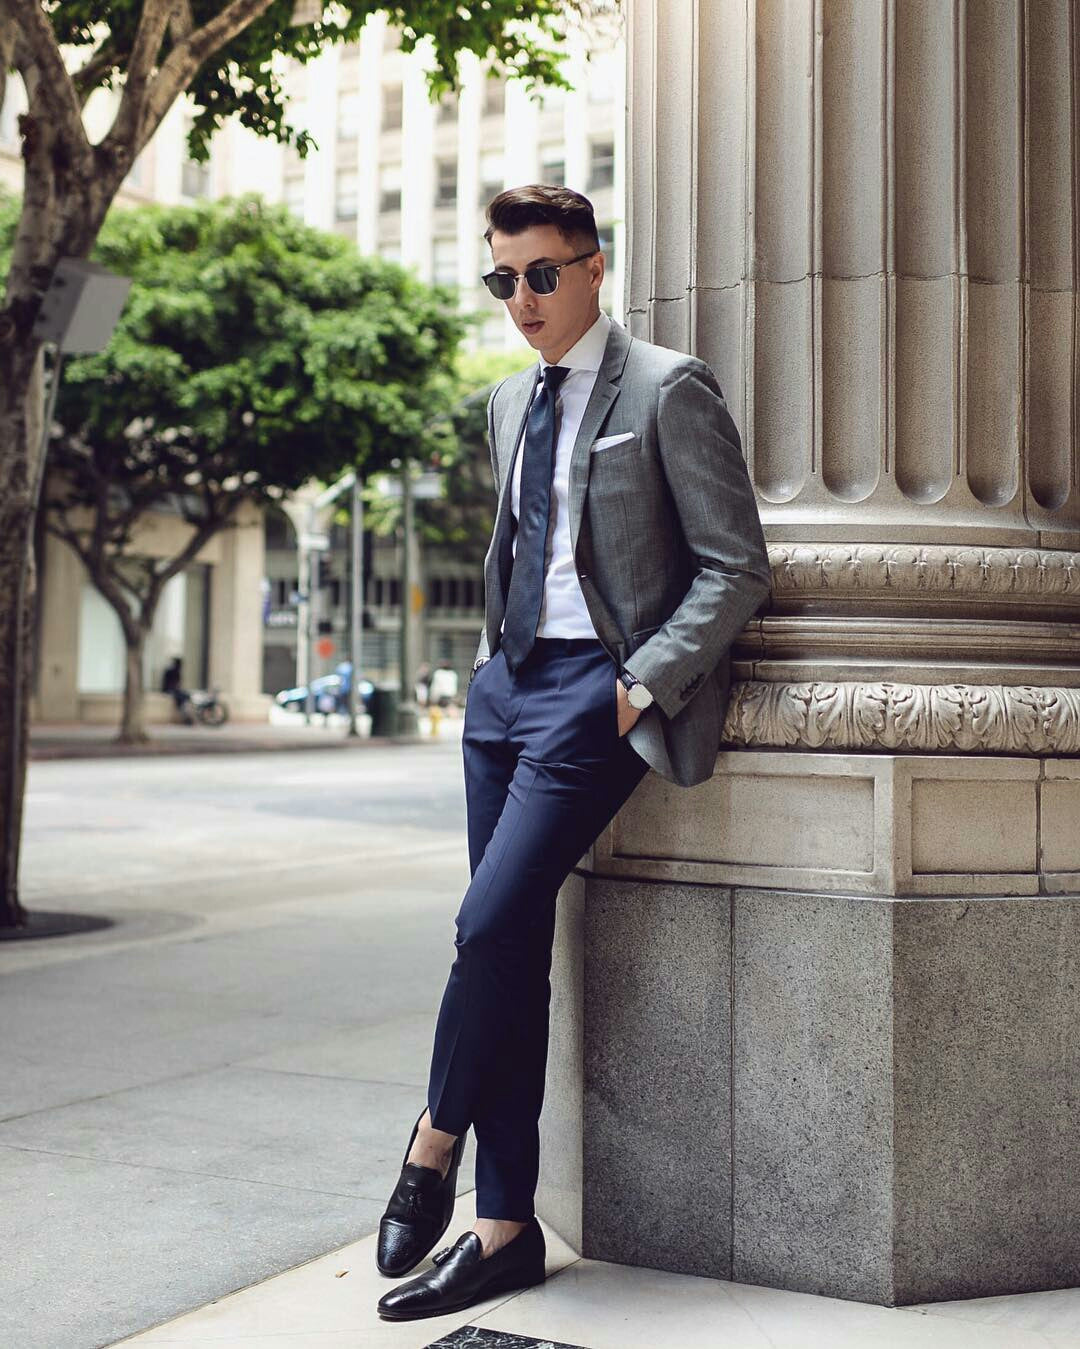 8 Elegant & Sharp Street Style Looks To Steal From This #Menswear Infl ...